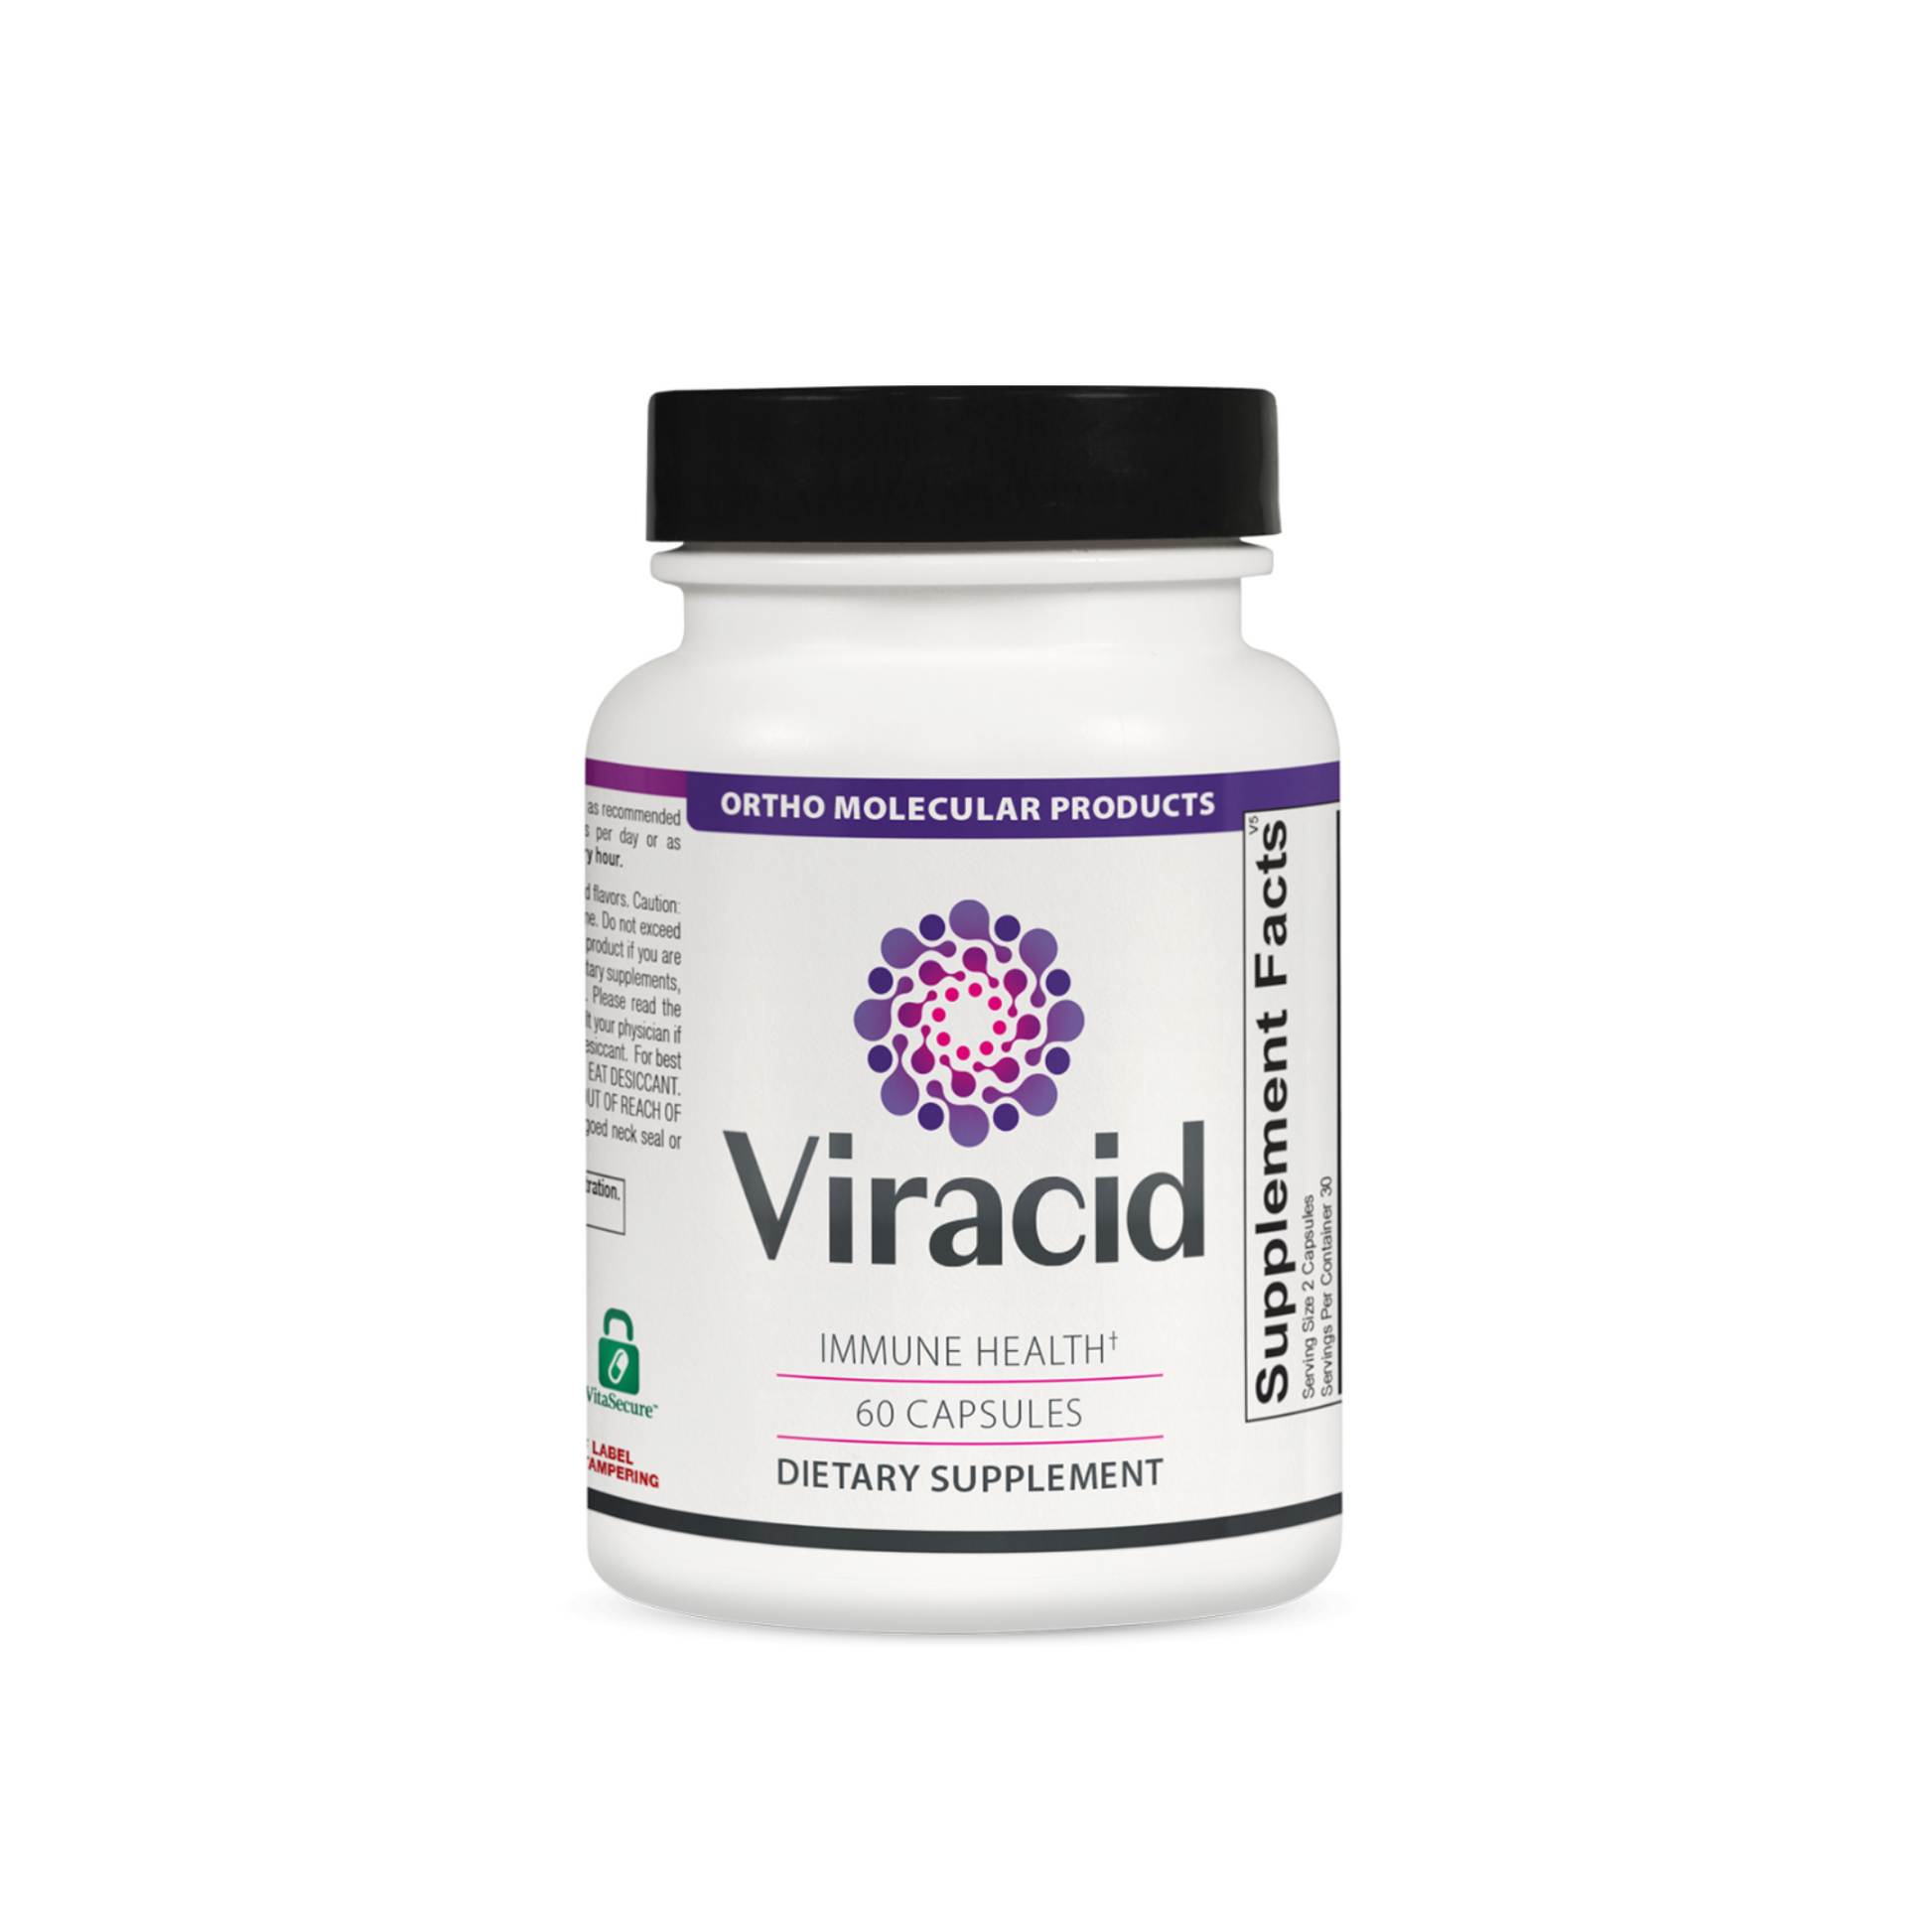 A bottle of Viracid | 60 capsules (bottle) with a purple label by Ortho Molecular Products, a longevity supplement by OHP Health.